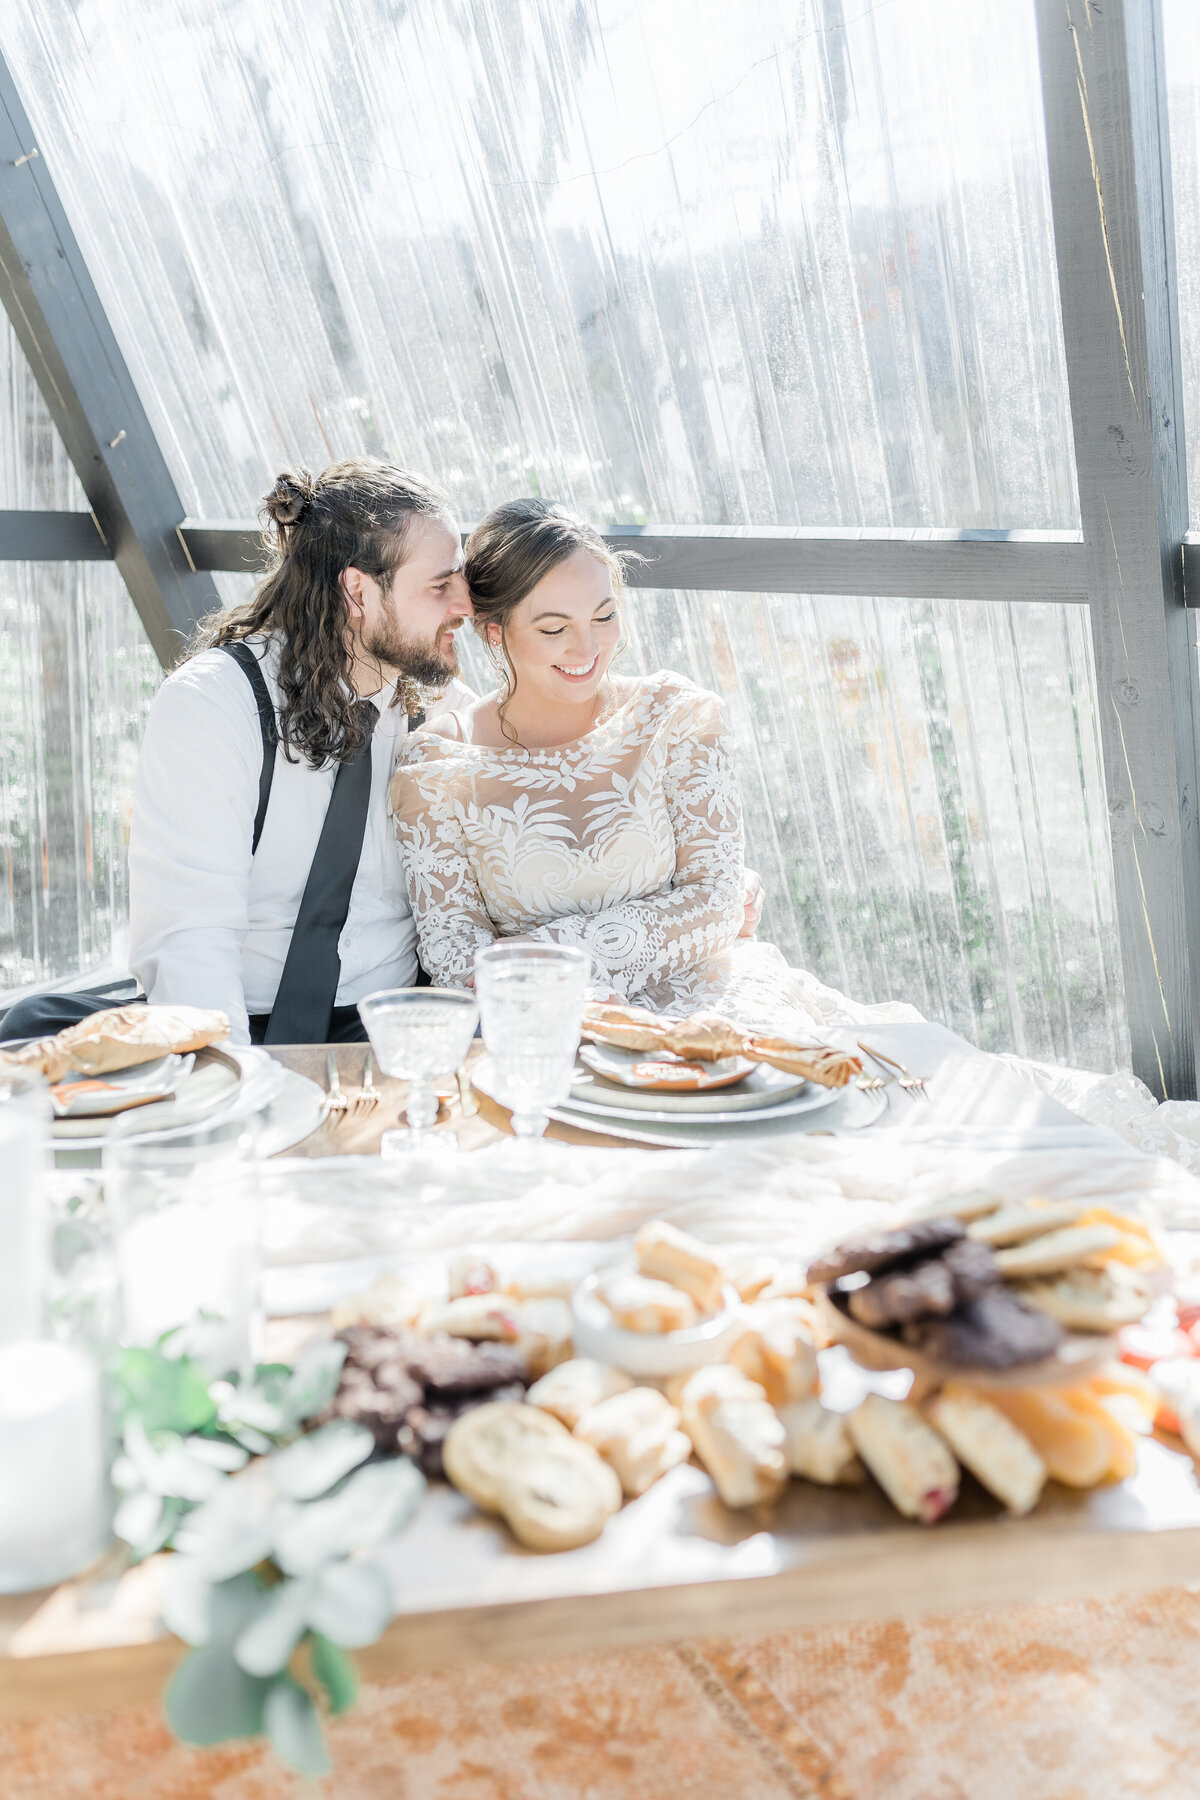 Bride and groom sharing a picnic in their glass cabin,